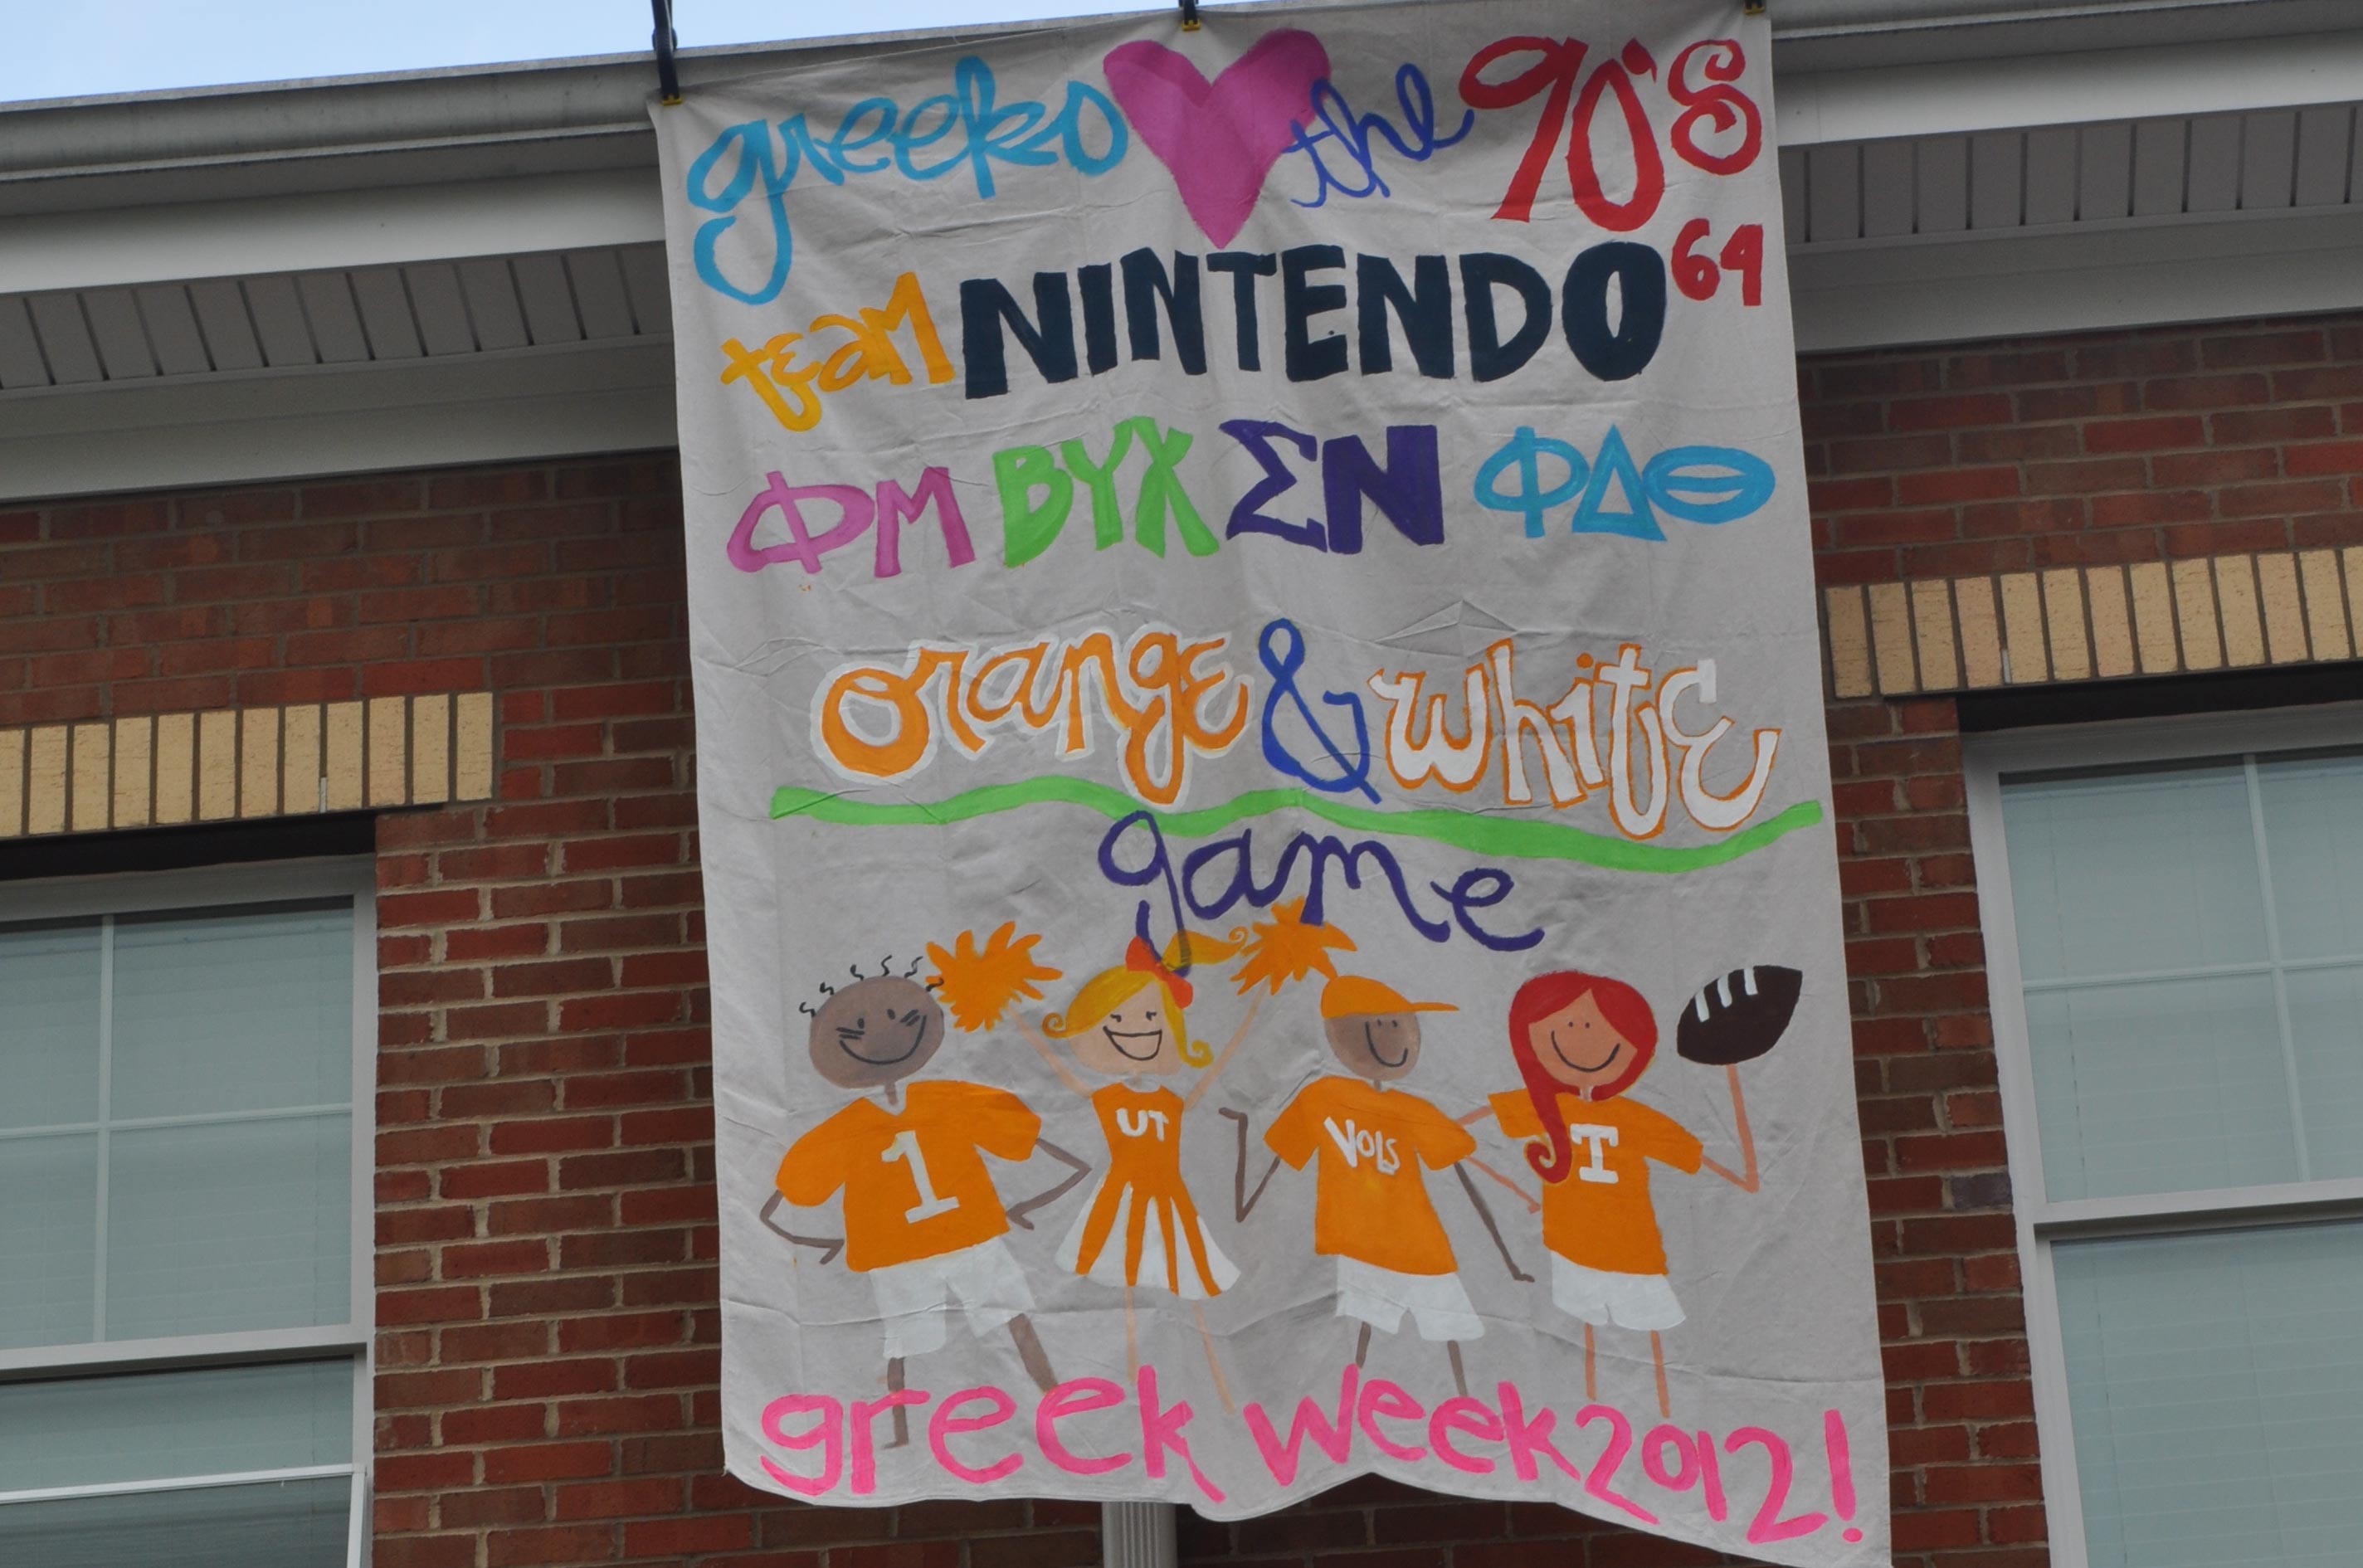 Sigma Nu UTK finished second out of 14 teams during Greek Week 2012-04